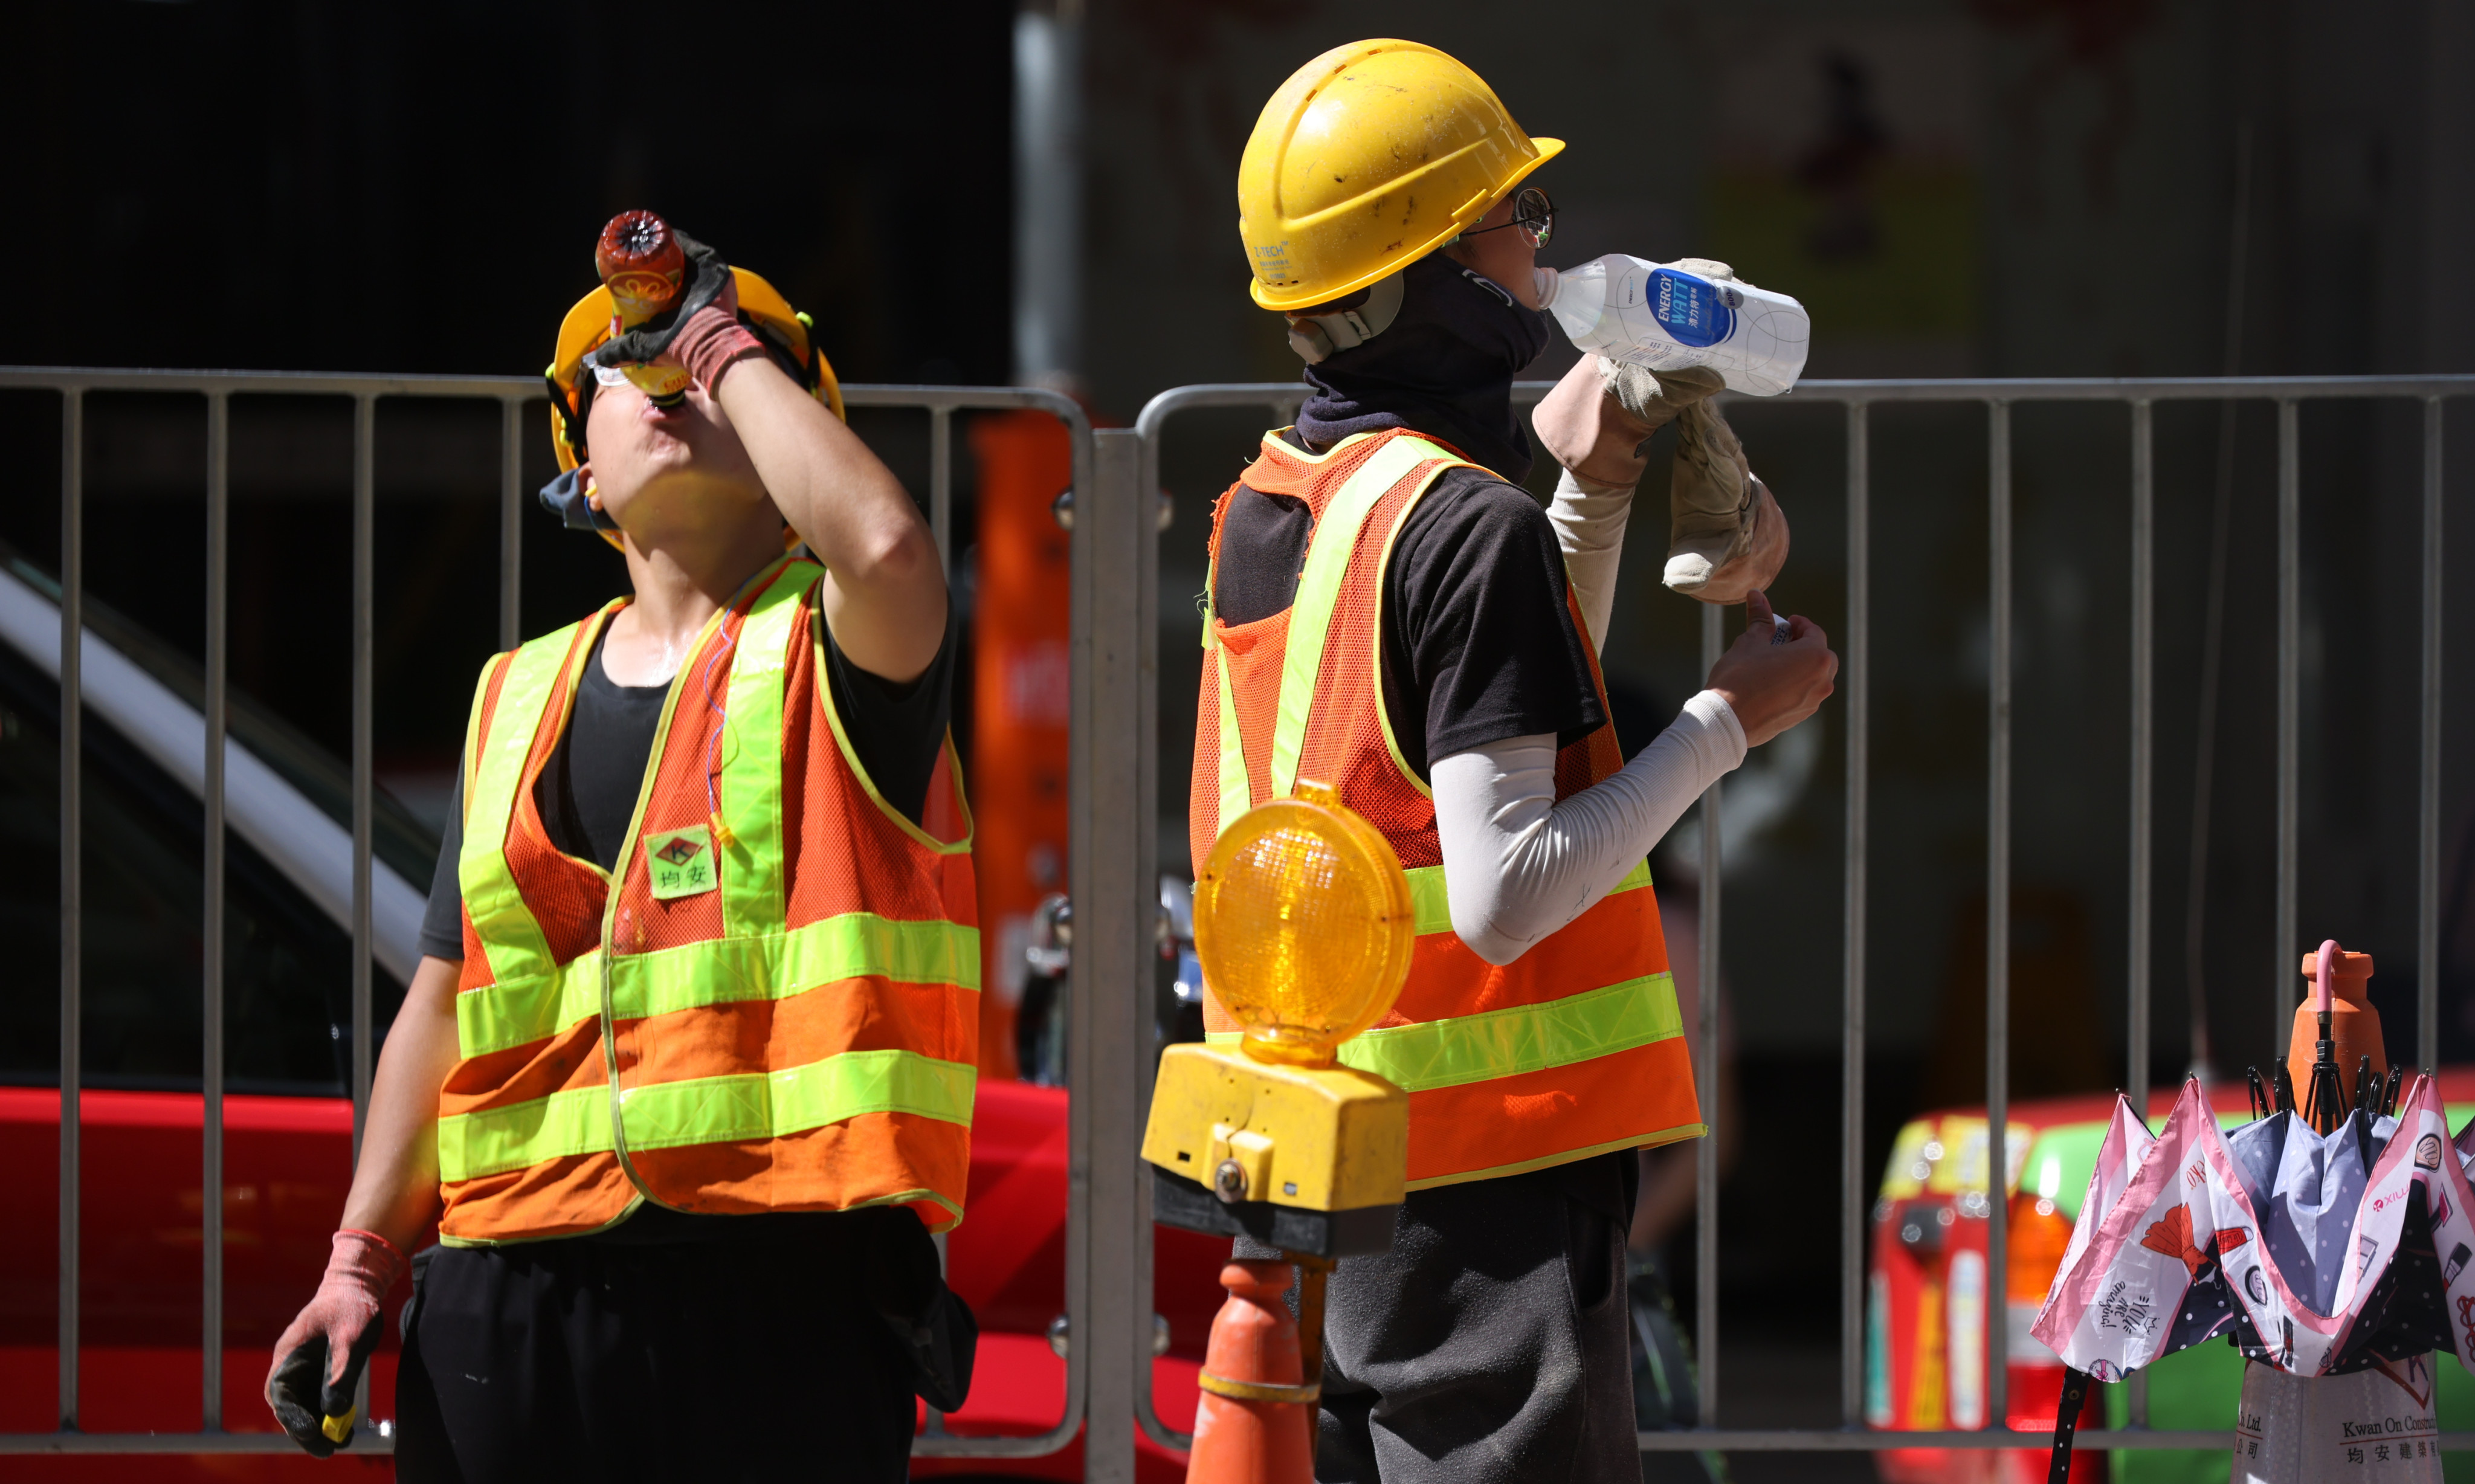 Road workers battle the heat in Wan Chai. Photo: Nora Tam